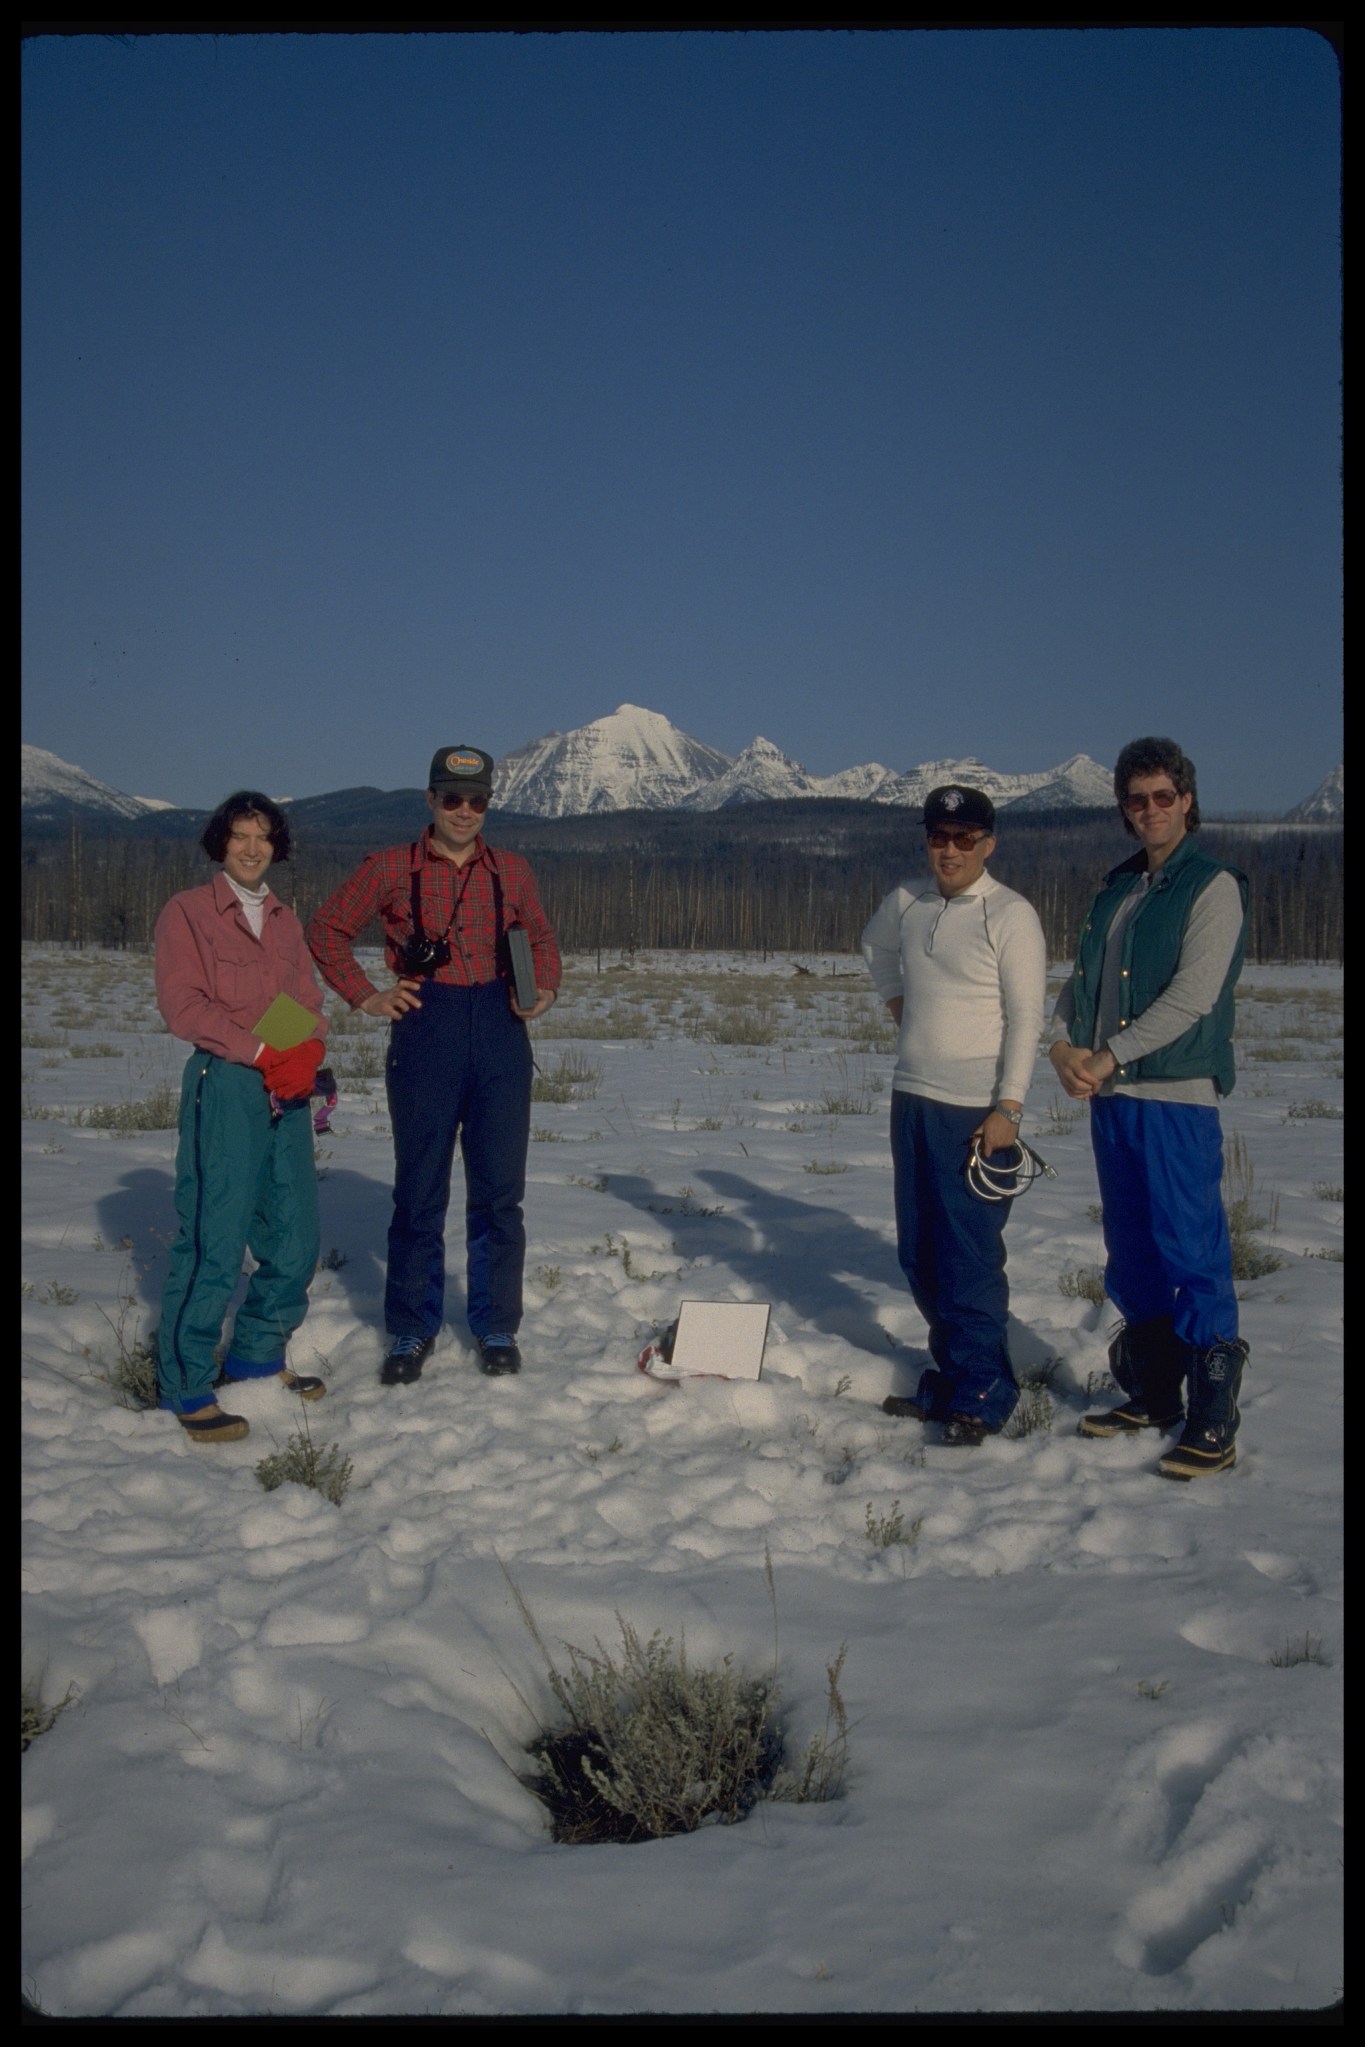 Hall, Fagre, Chang, and Foster in near Mt. Wrangell in Alaska